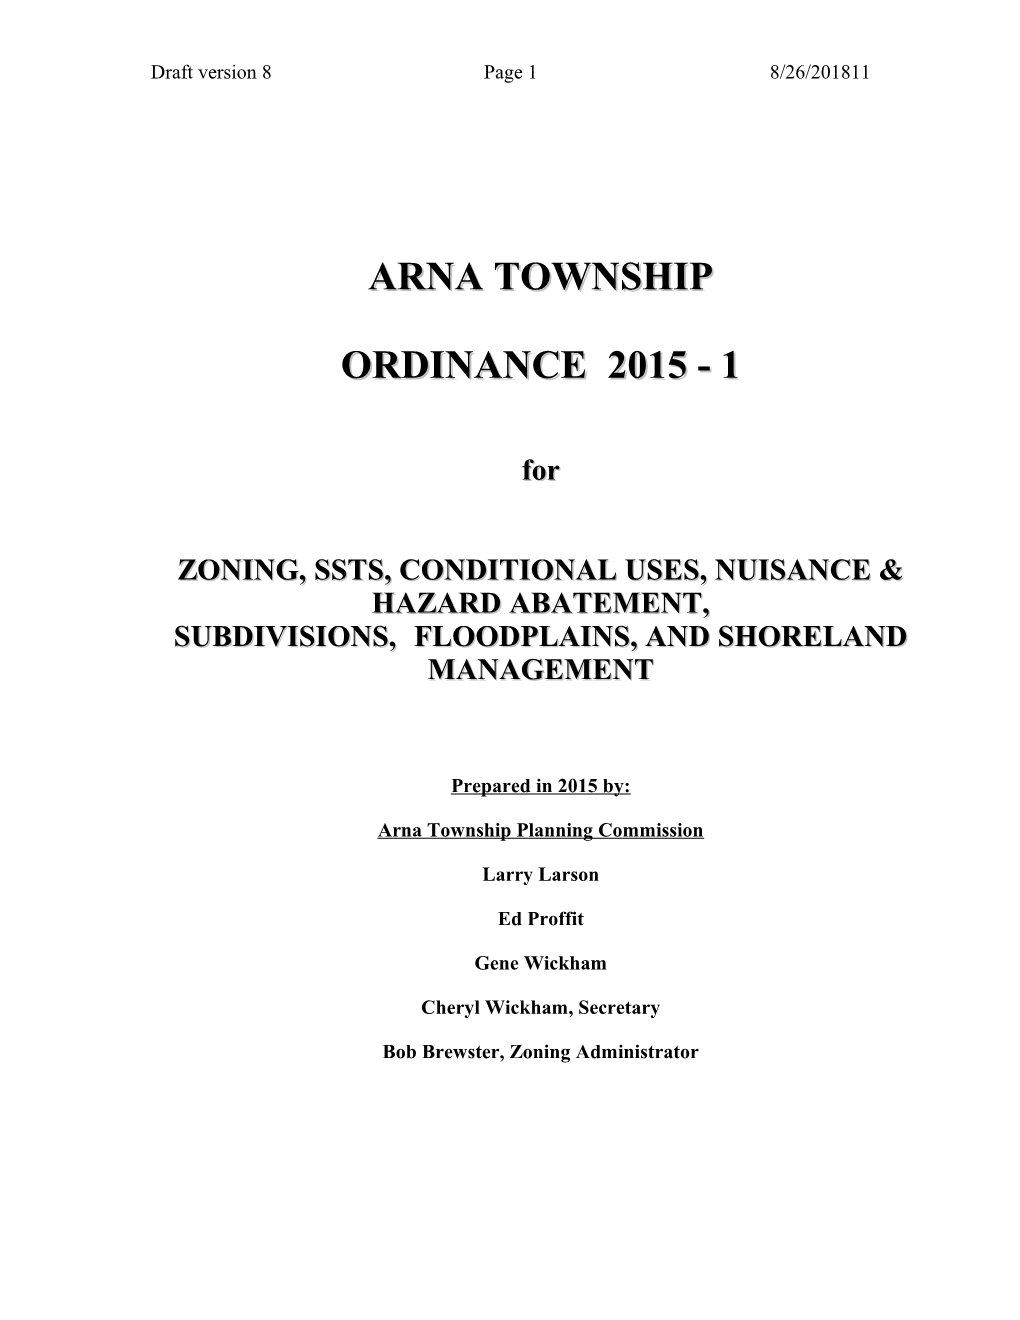 Zoning, Ssts, Conditional Uses, Nuisance & Hazard Abatement